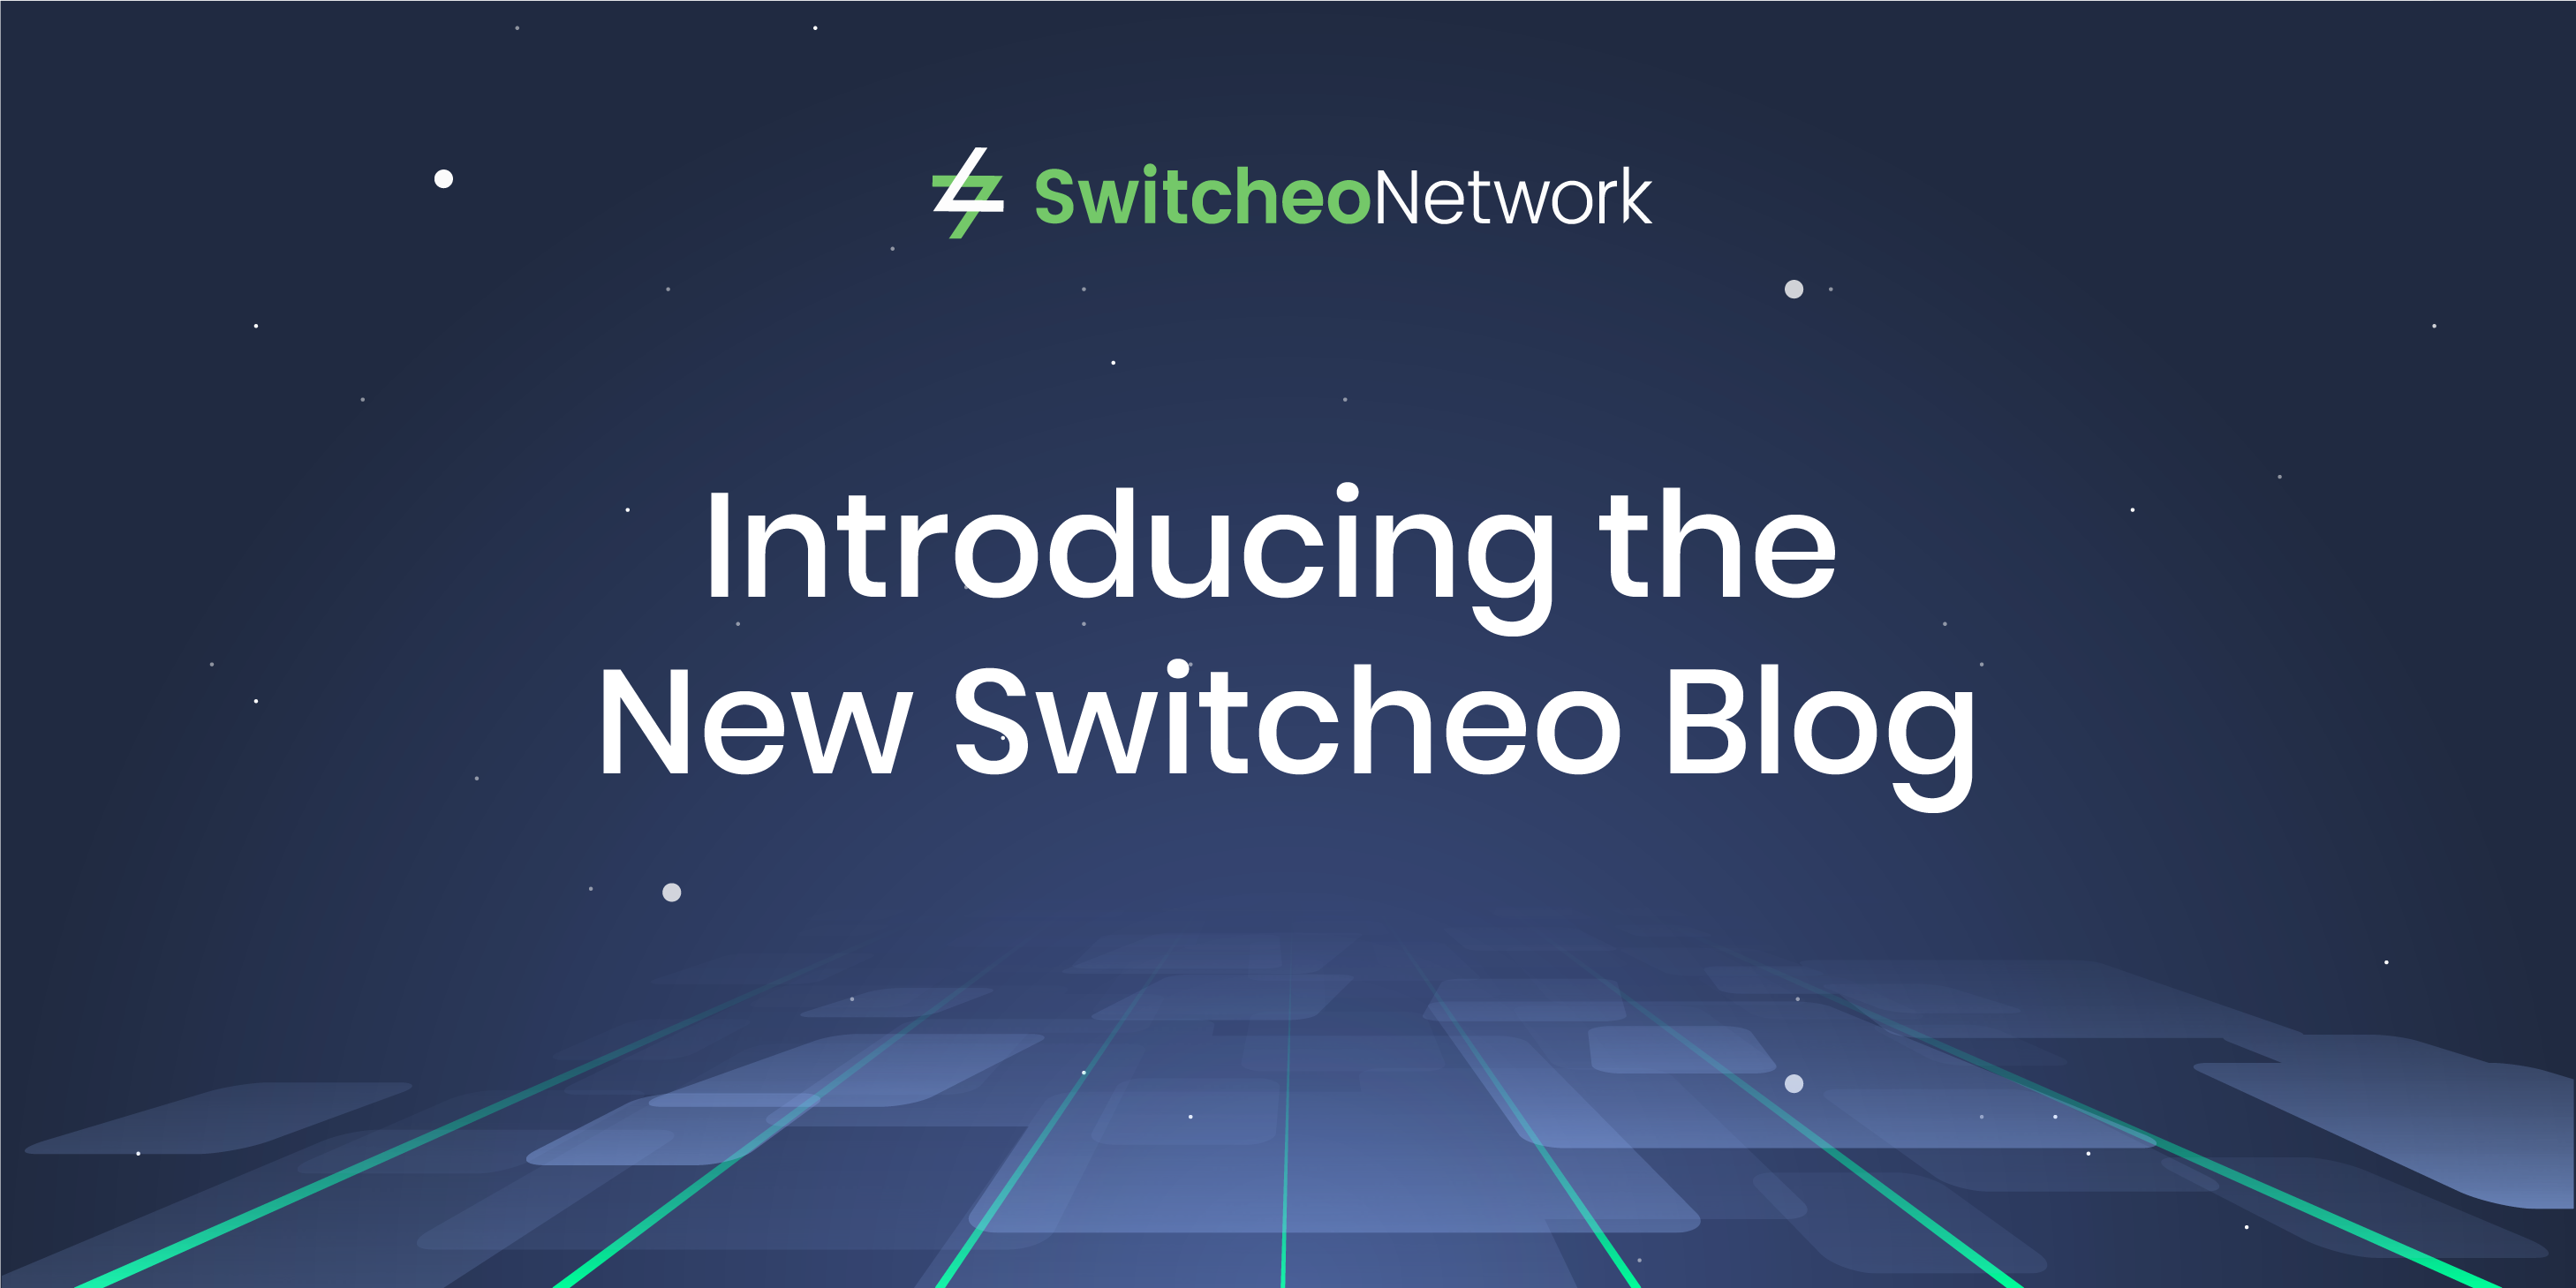 Introducing the New Switcheo Blog!